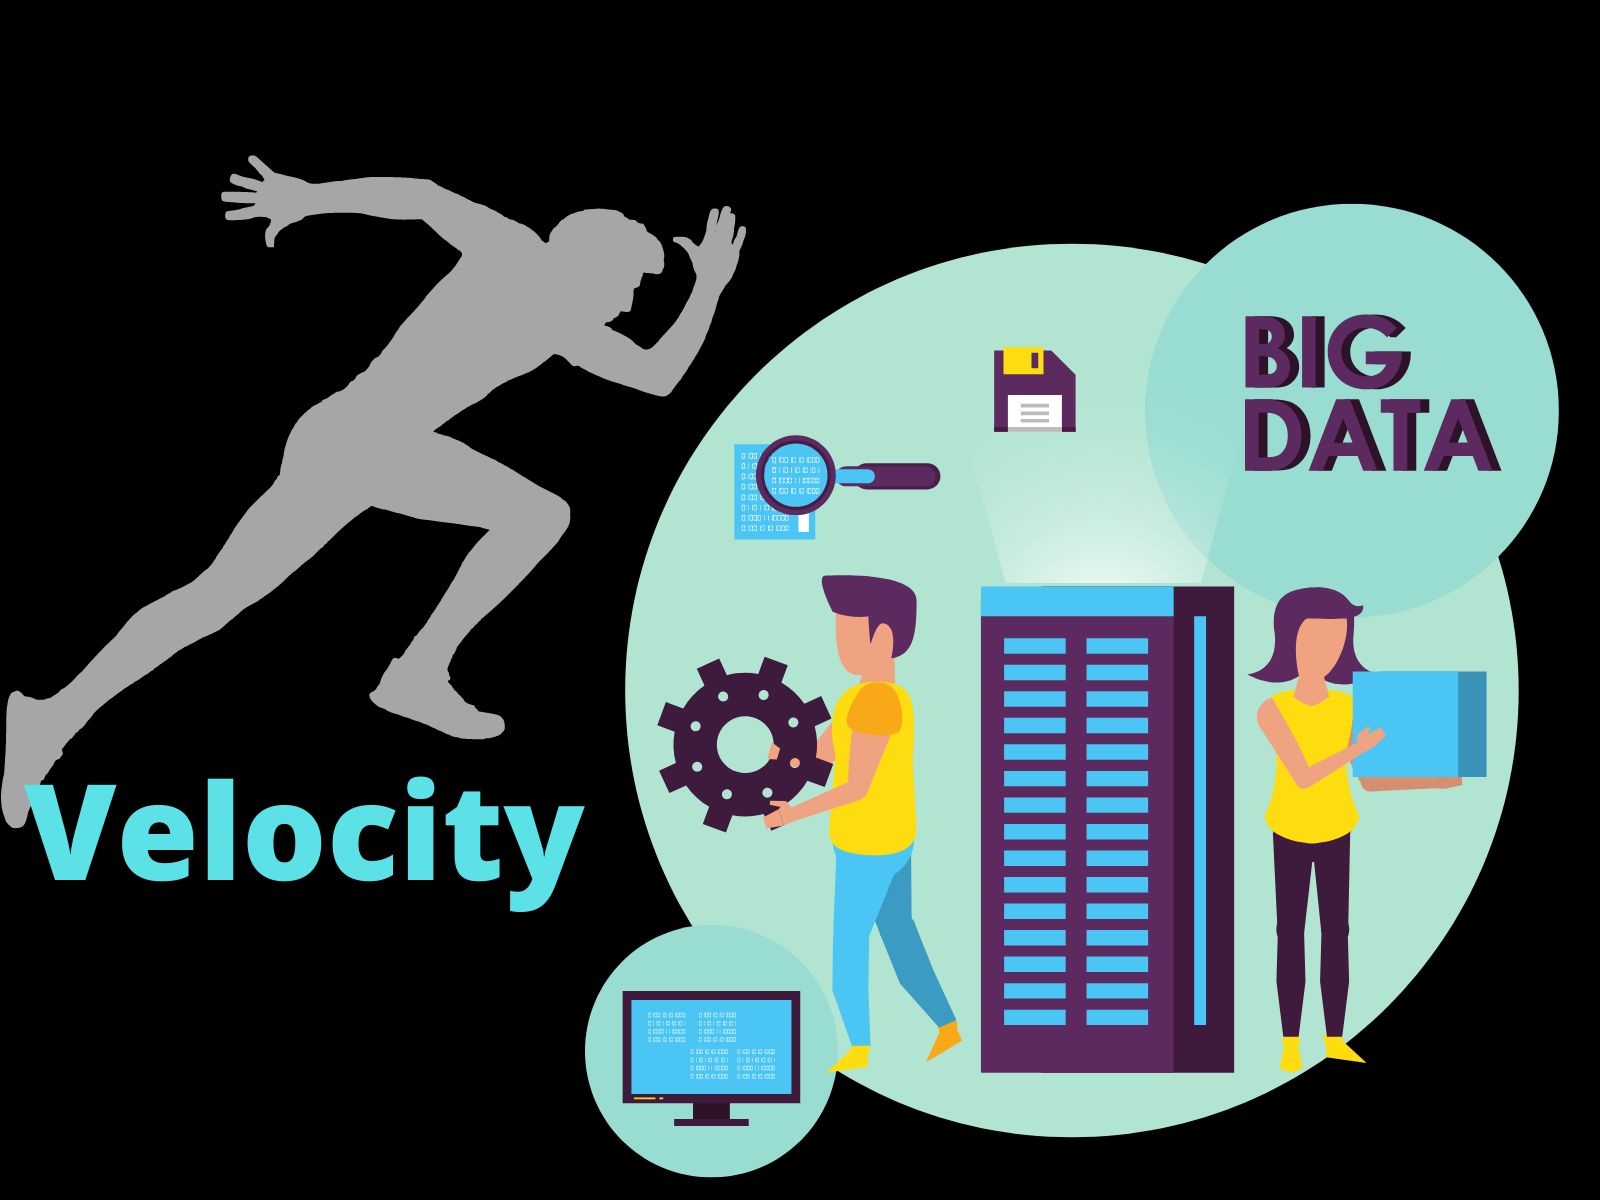 In Terms Of Big Data, What Is Velocity?